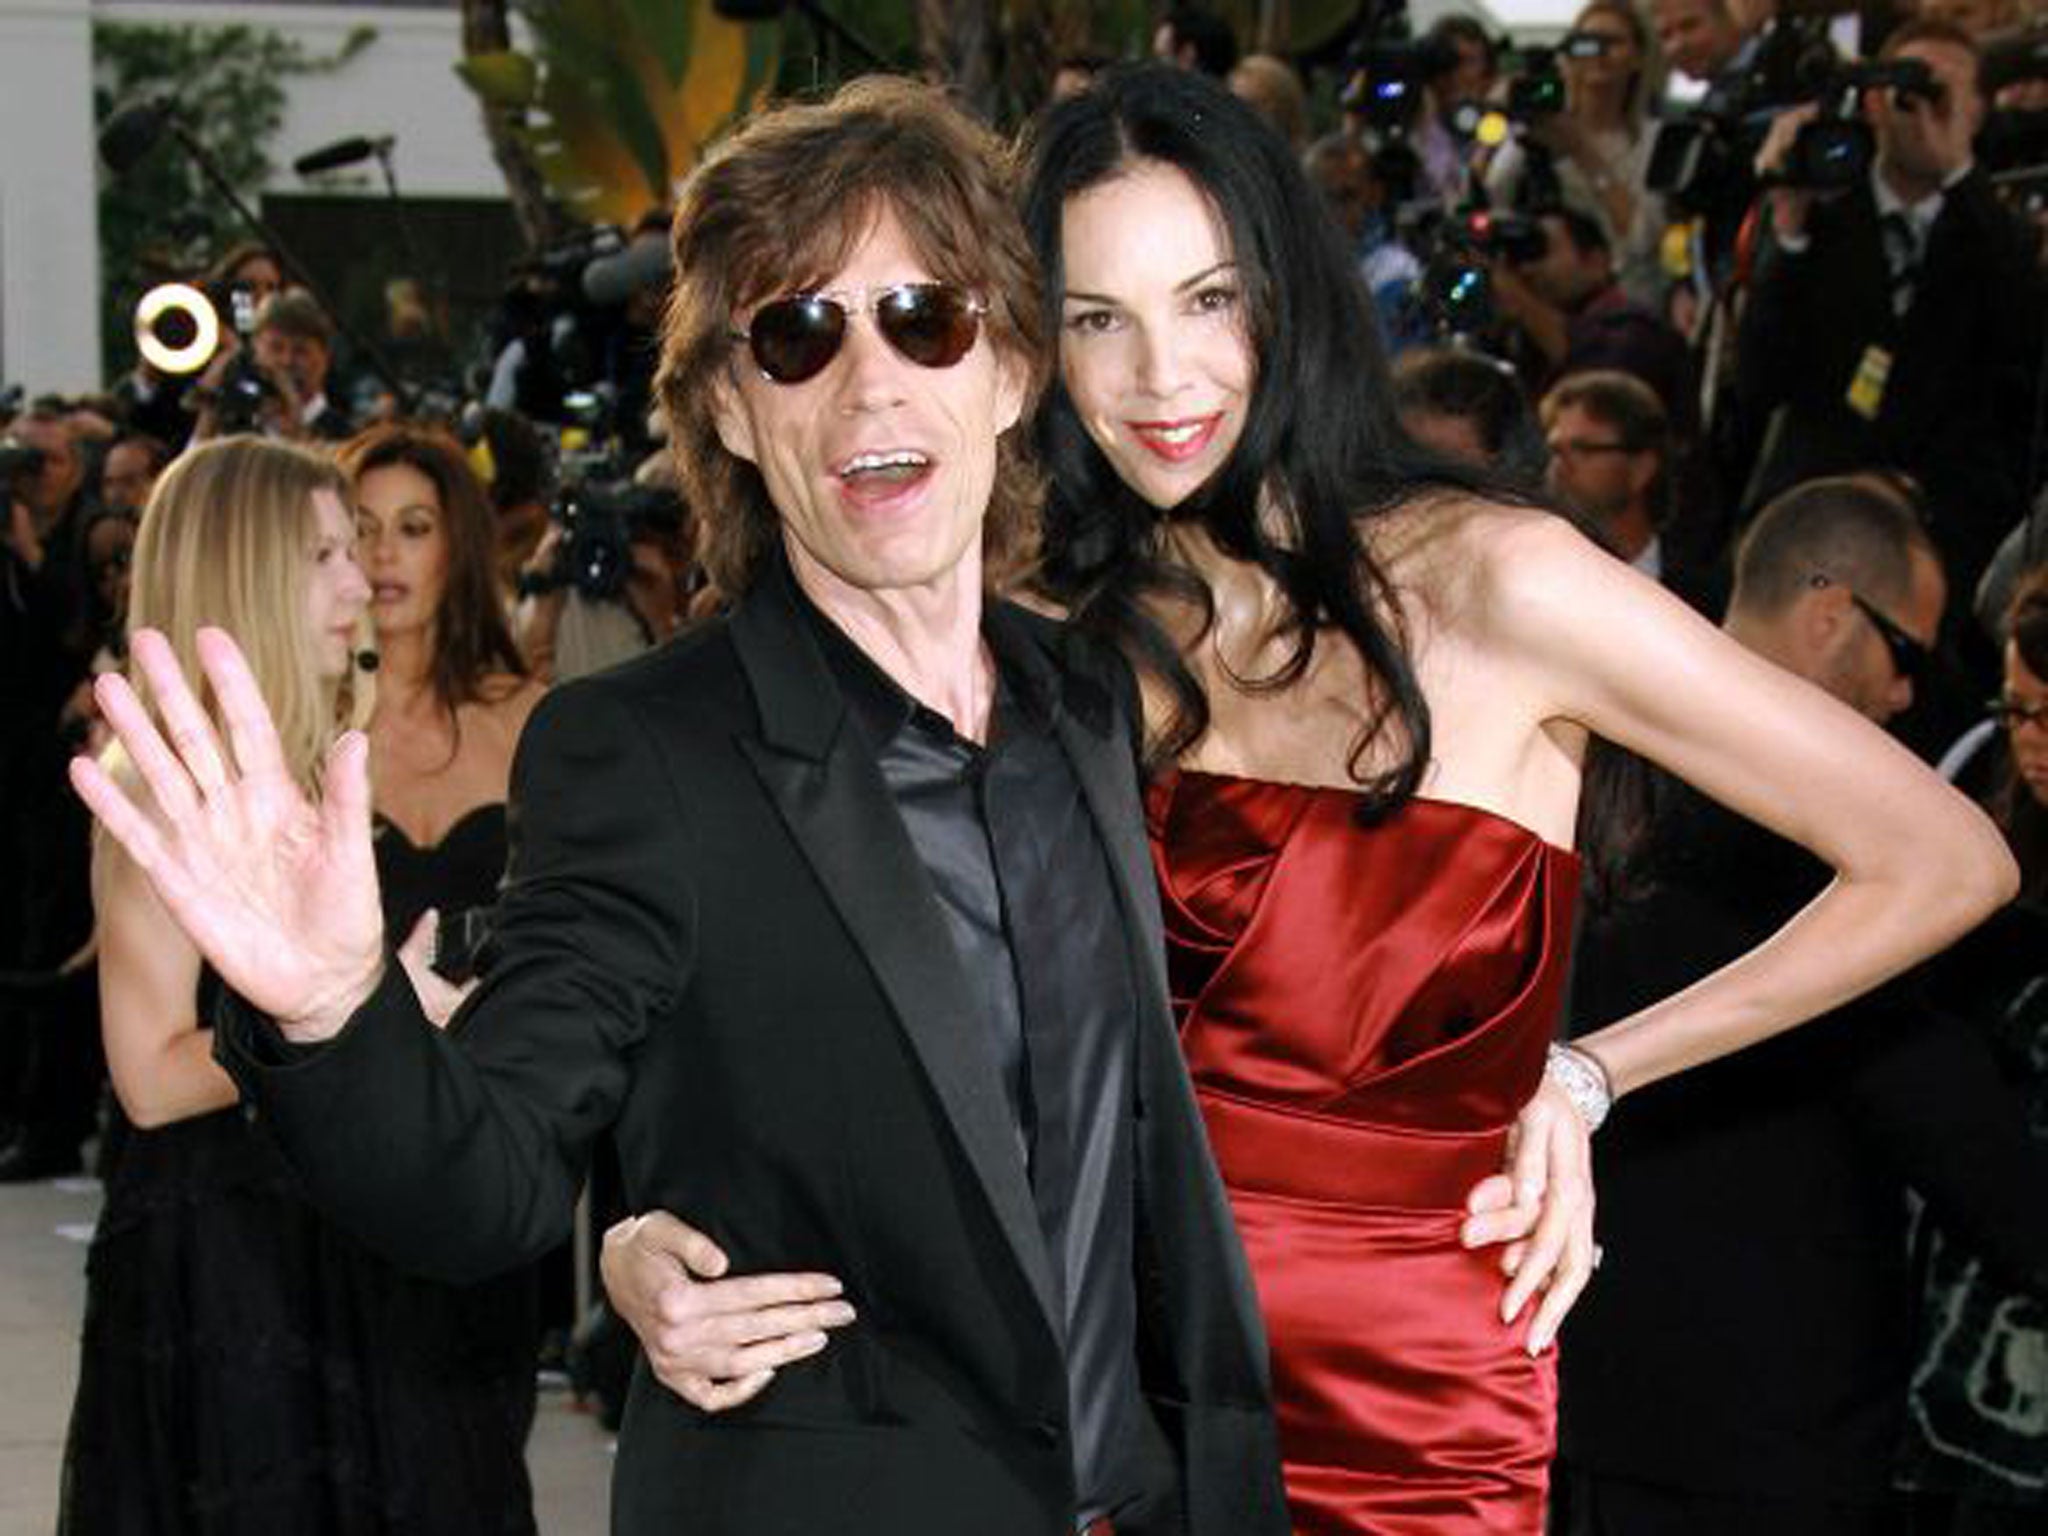 Sir Mick Jagger and L’Wren Scott had been together since 2001